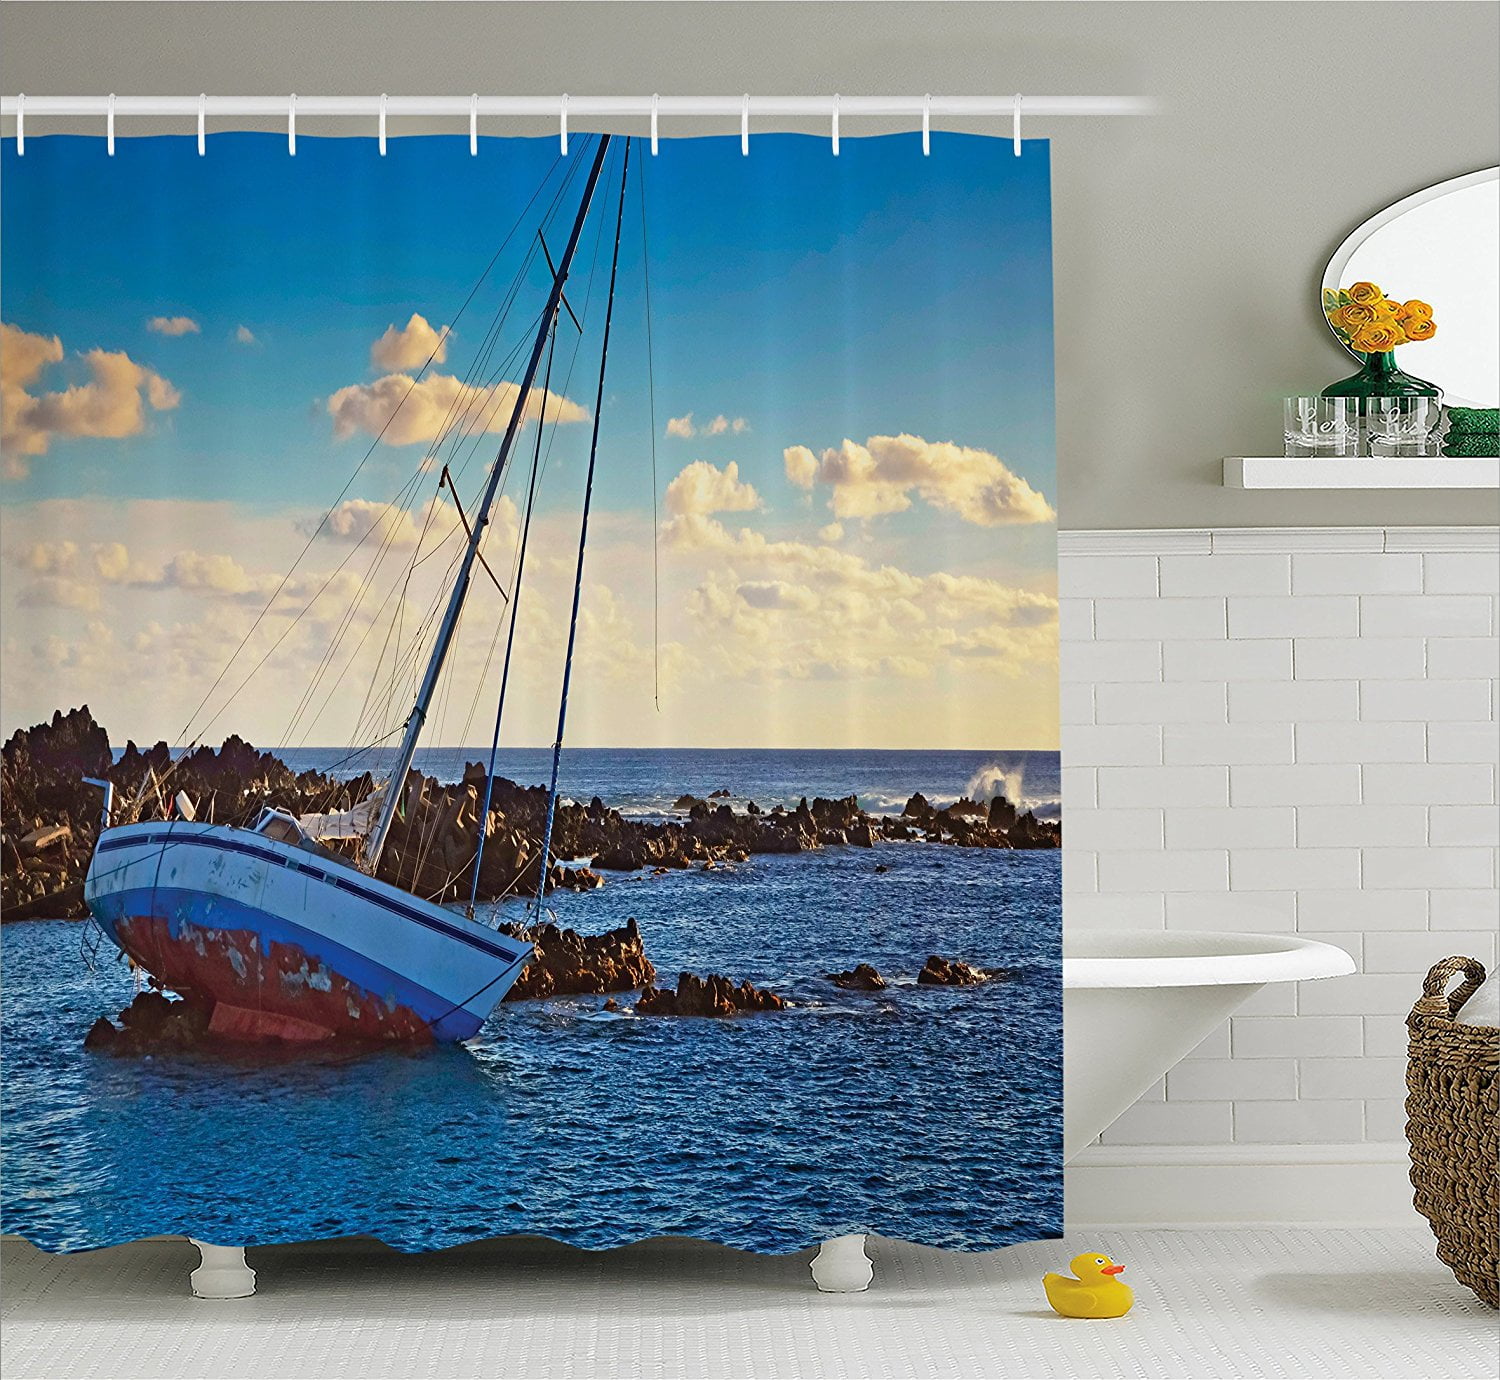 Sailboat And Sun Painting Waterproof Fabric Shower Curtain Set Bathroom 71Inch 